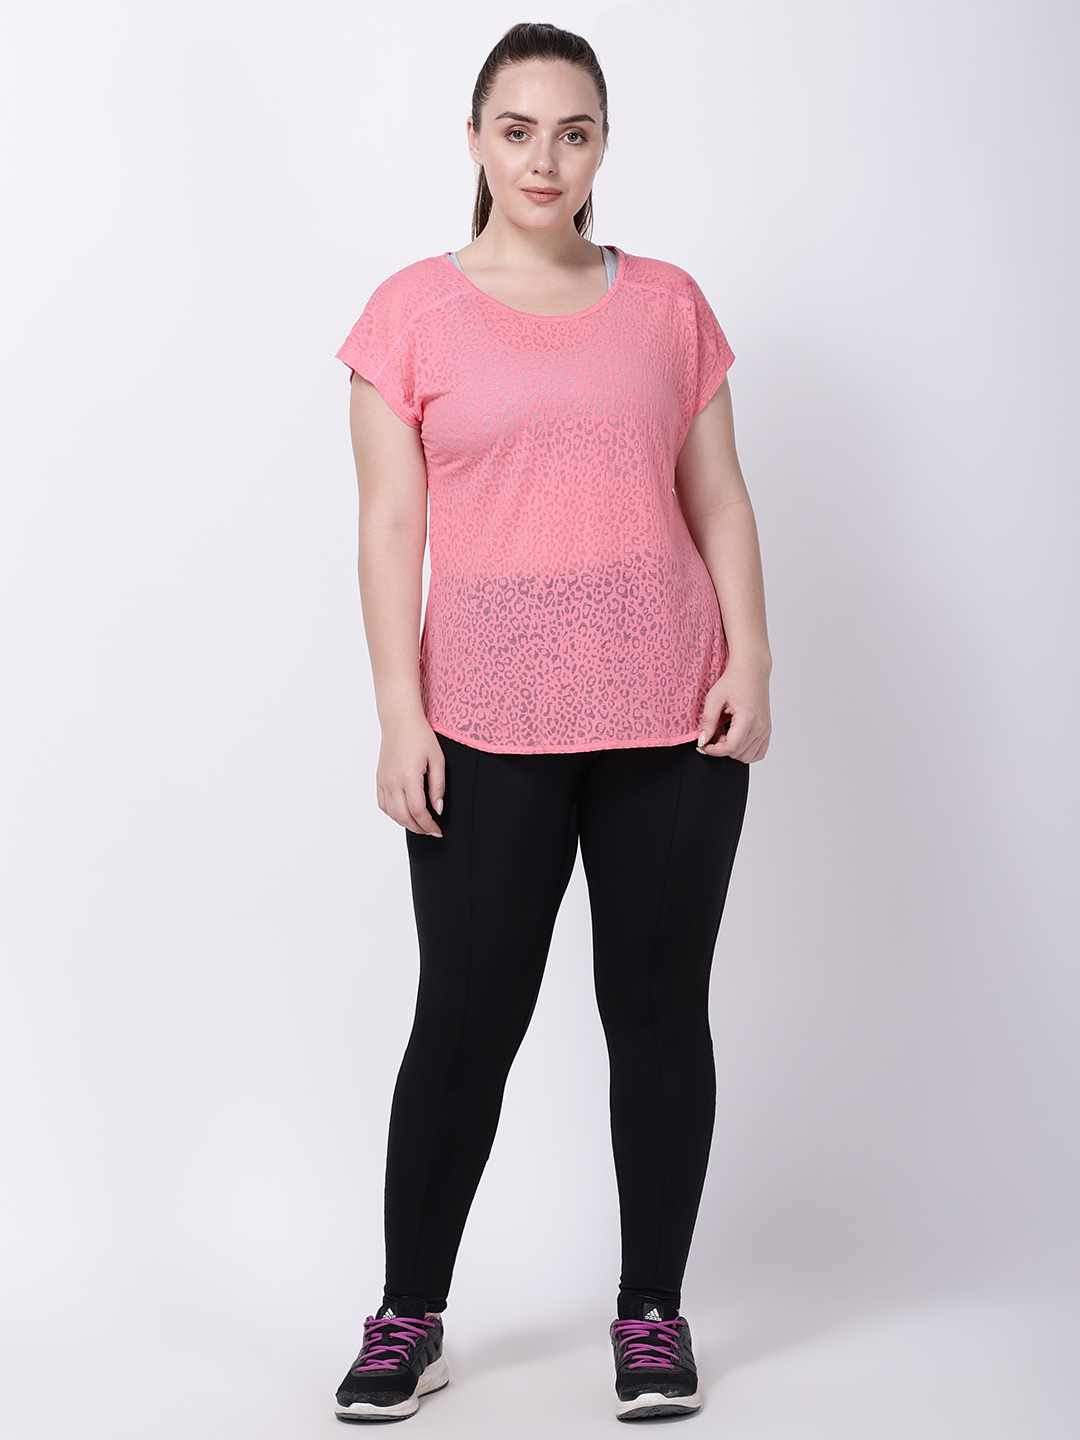 Pink Burnout Sexy Back Tee